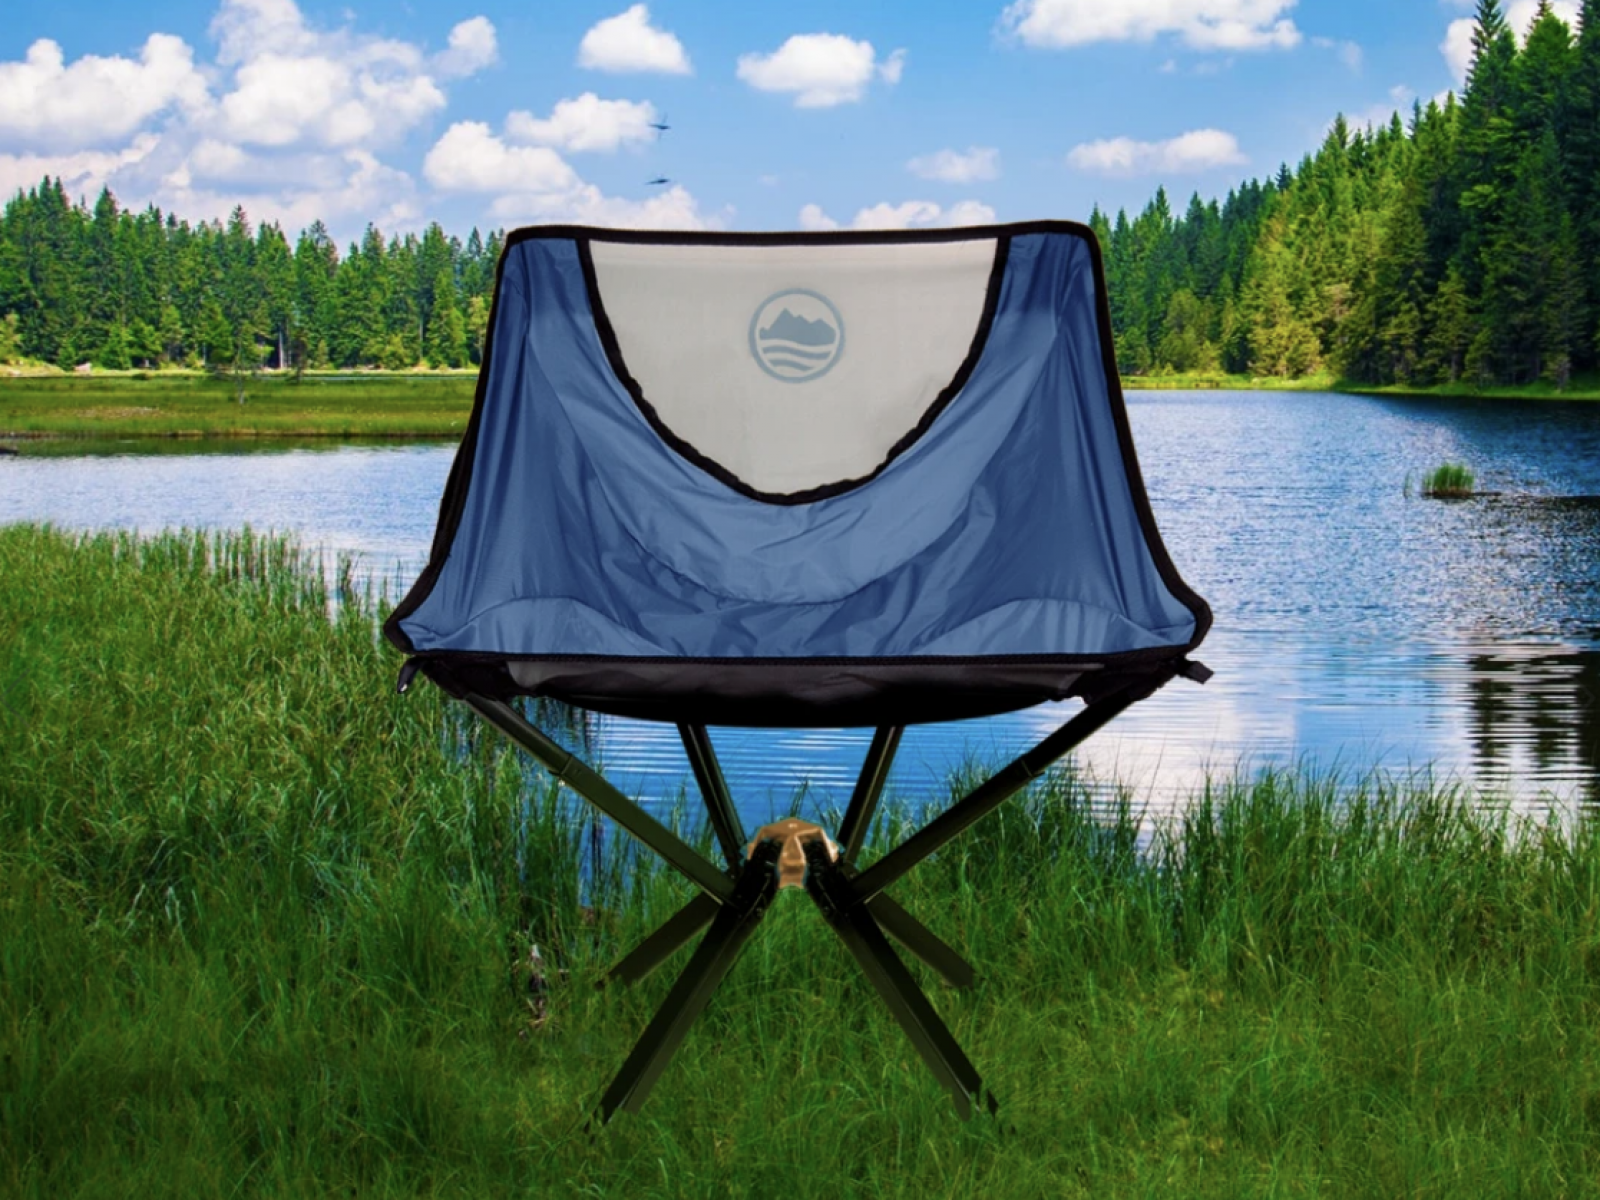 The 8 Best Beach and Camp Chairs for Summer 2021